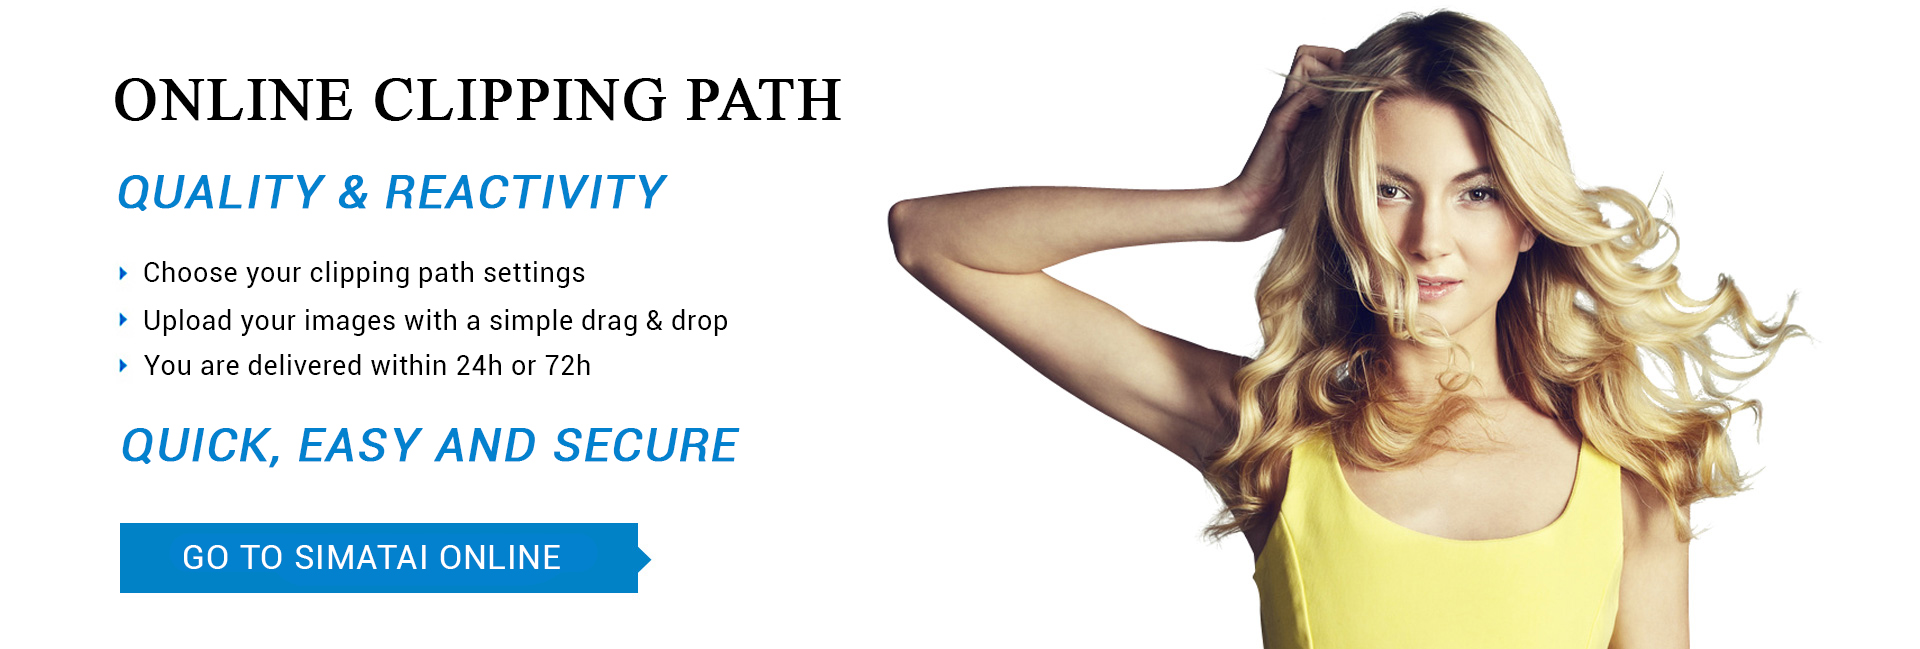 Online clipping path banner